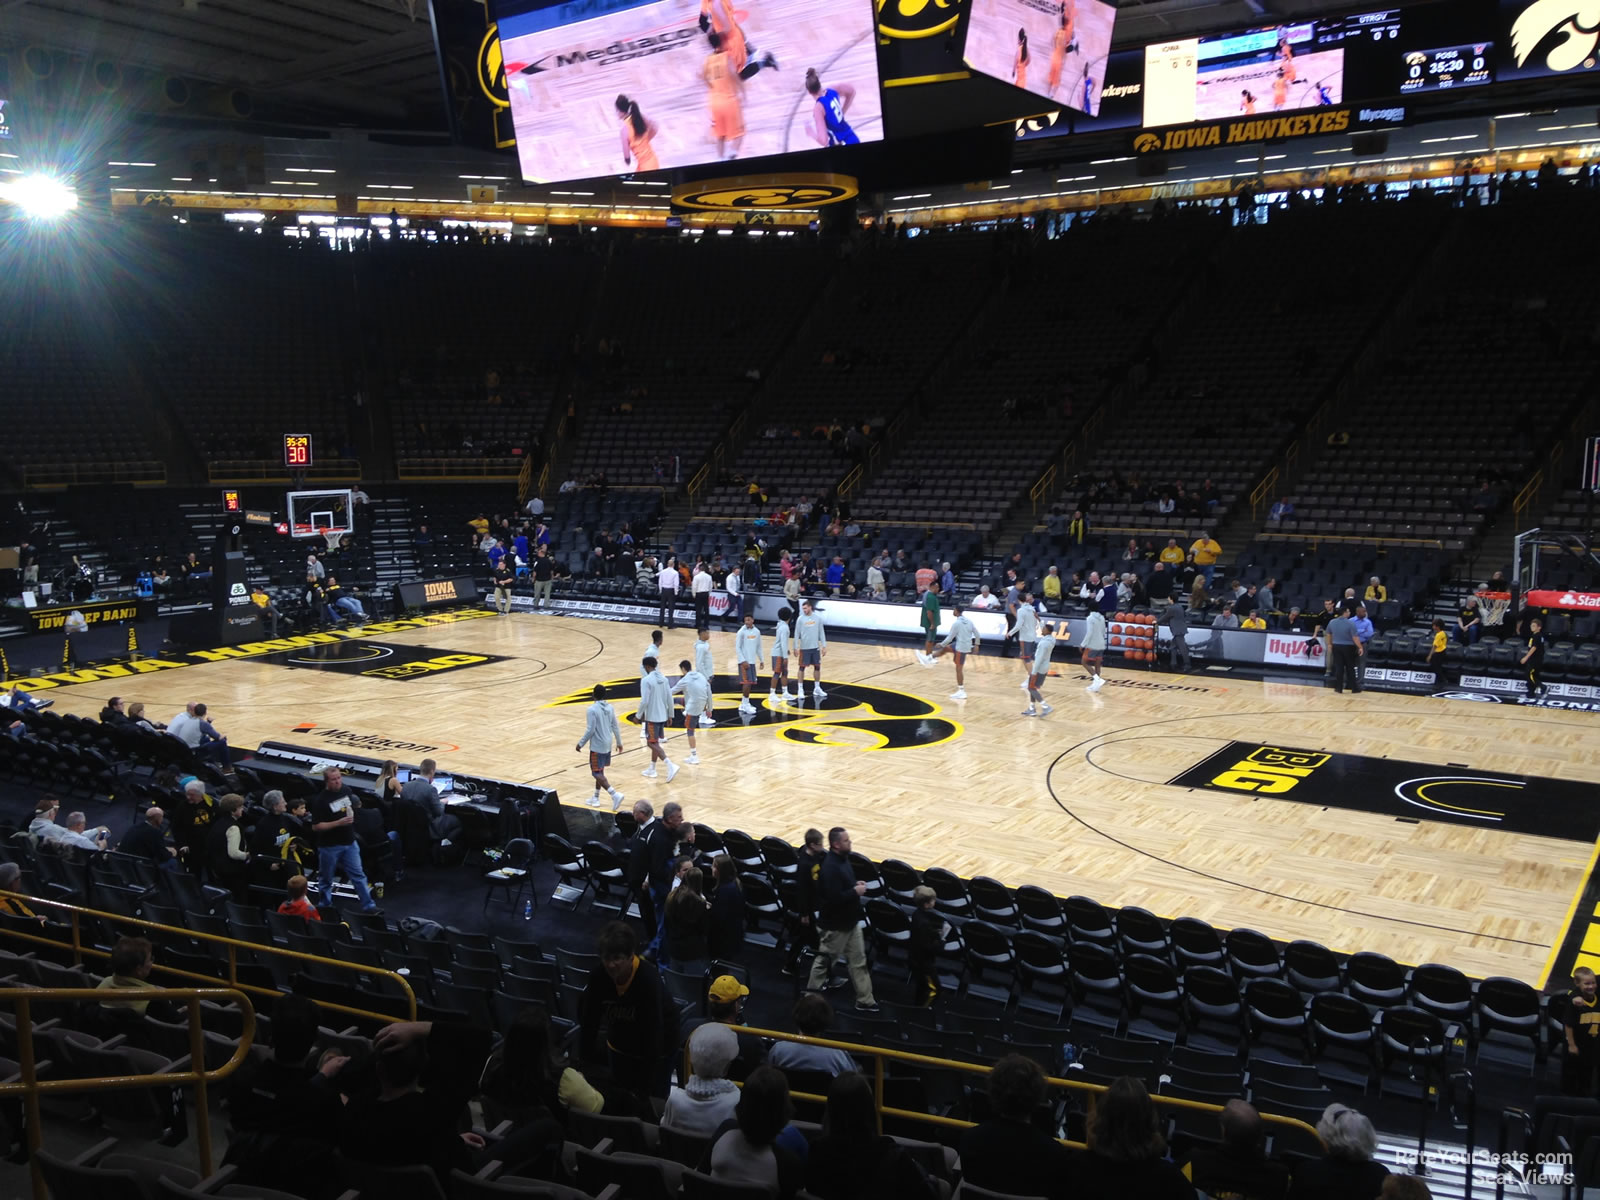 section ll, row 15 seat view  - carver-hawkeye arena